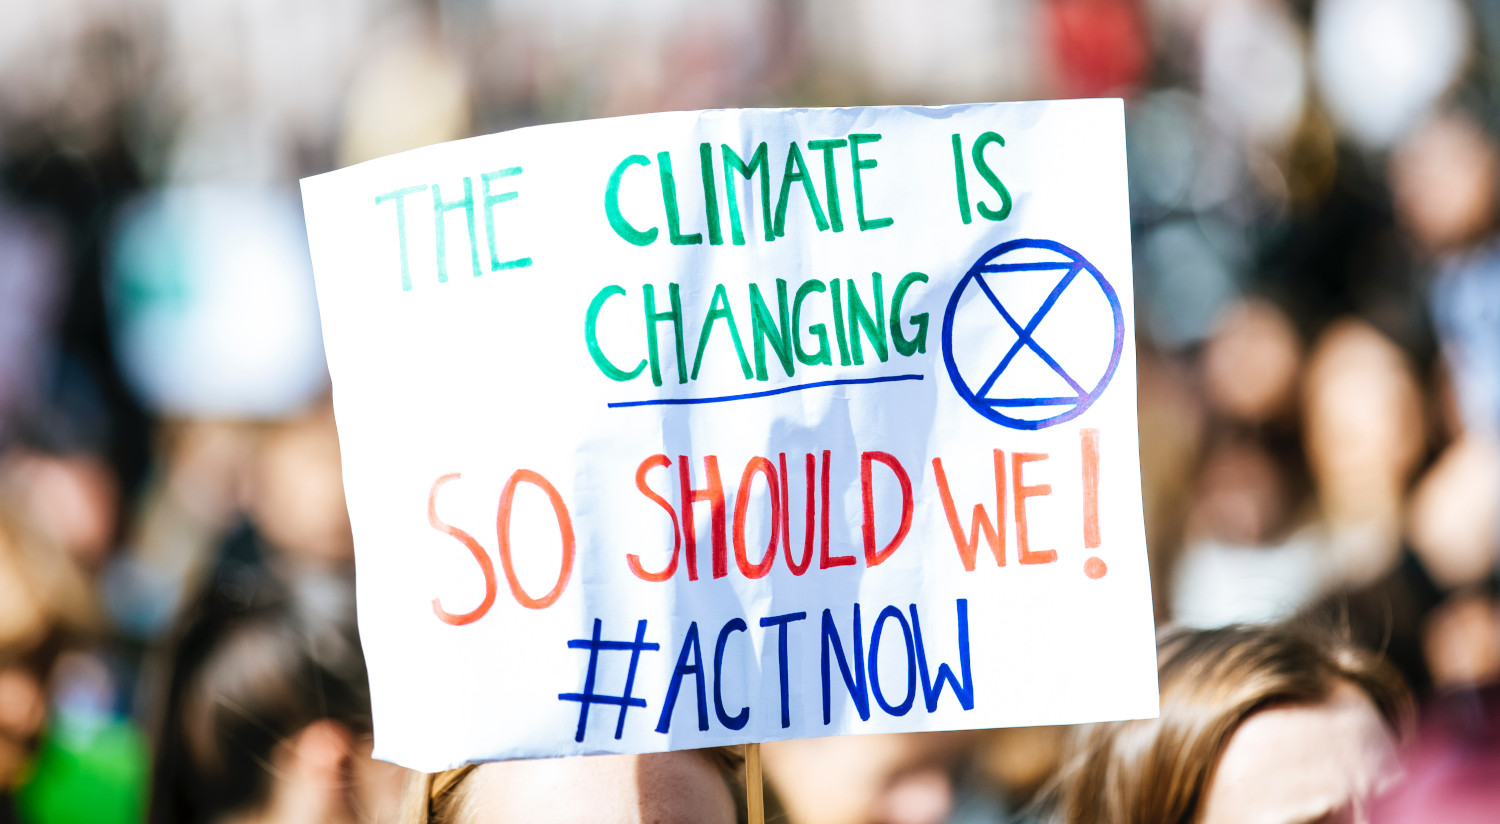 The climate is changing. So should we! #Act Now - Full credit to Food Tank